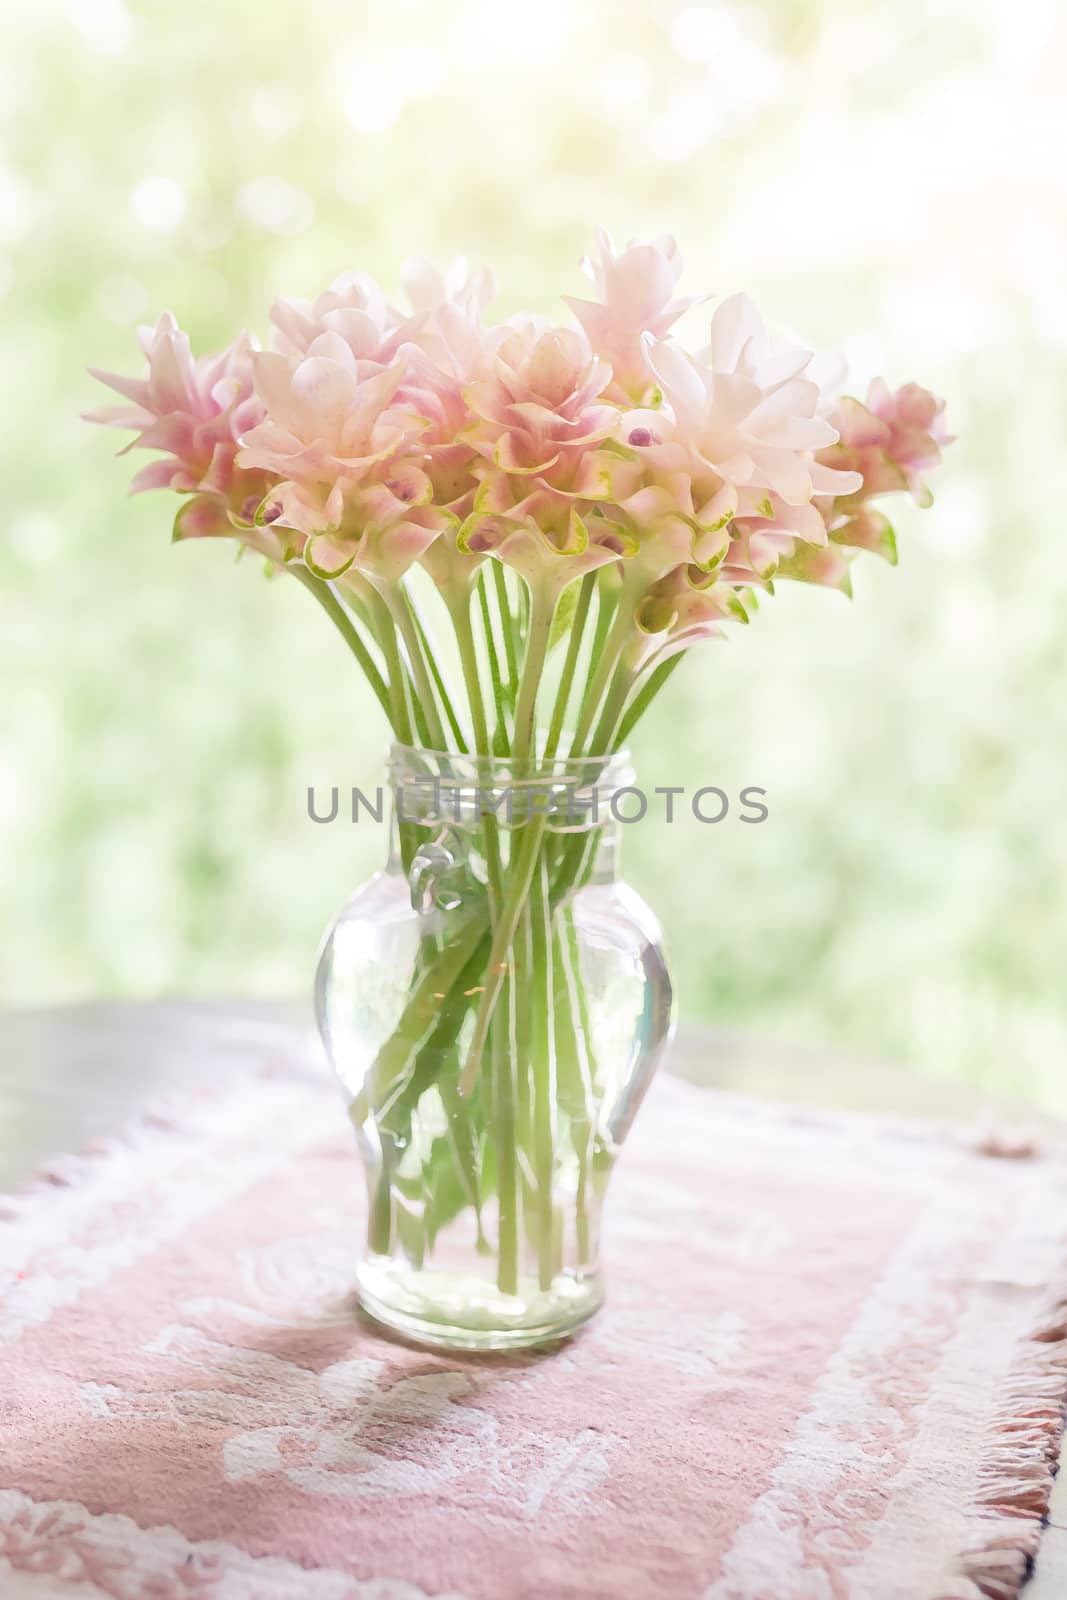 Defocus and soft focus pink blossom, delicate floral background with copy space. Use painting effect .